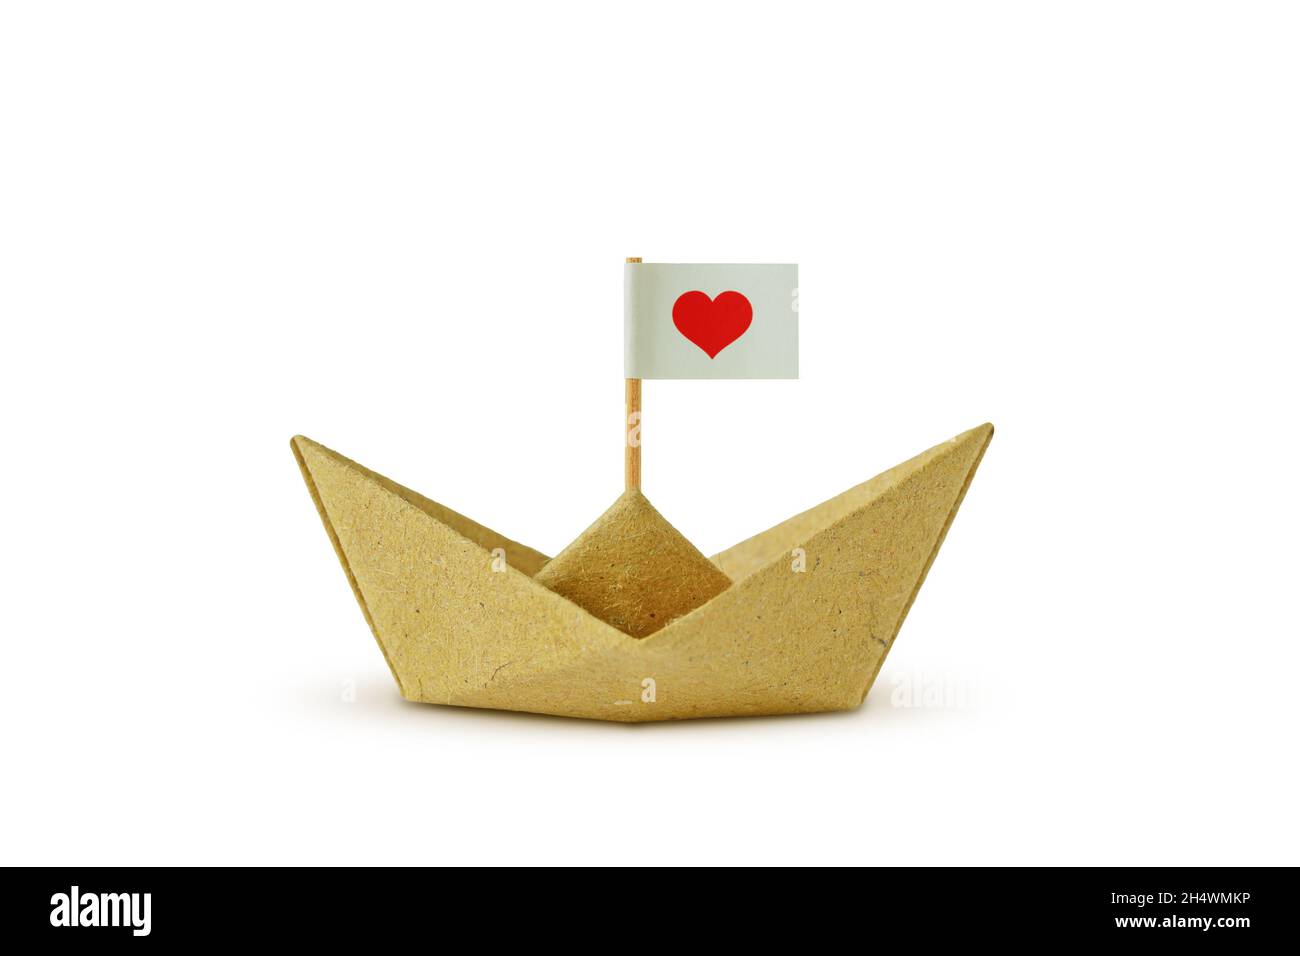 Origami boat made of recycled paper with flag and heart - Concept of immigration and solidarity Stock Photo